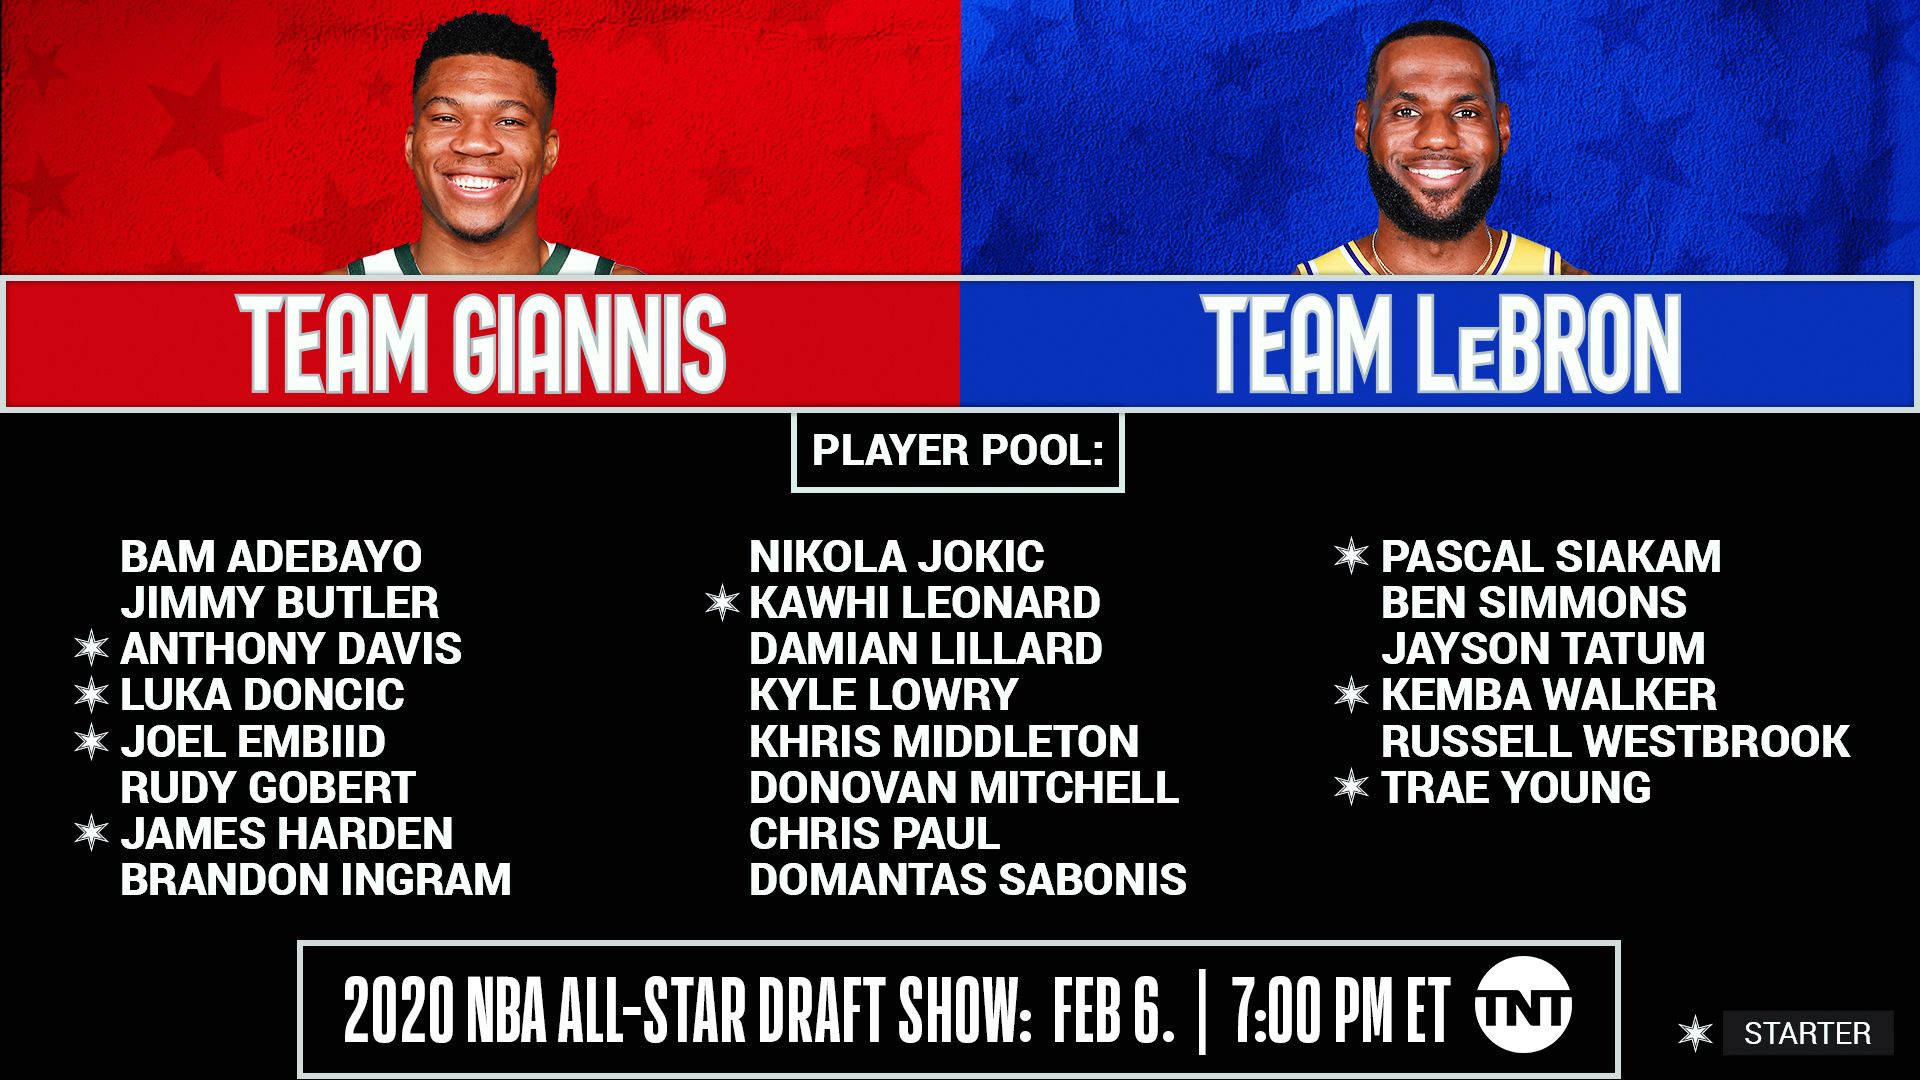 NBAAllStar #TeamGiannis X #TeamLeBron Team Captains Giannis Antetokounmpo And LeBron James Will Select From The #NBAAllStar Player Pool In The NBA All Star 2020 Draft Show. Thursday Feb. 7:00pm Et, @NBAonTNT